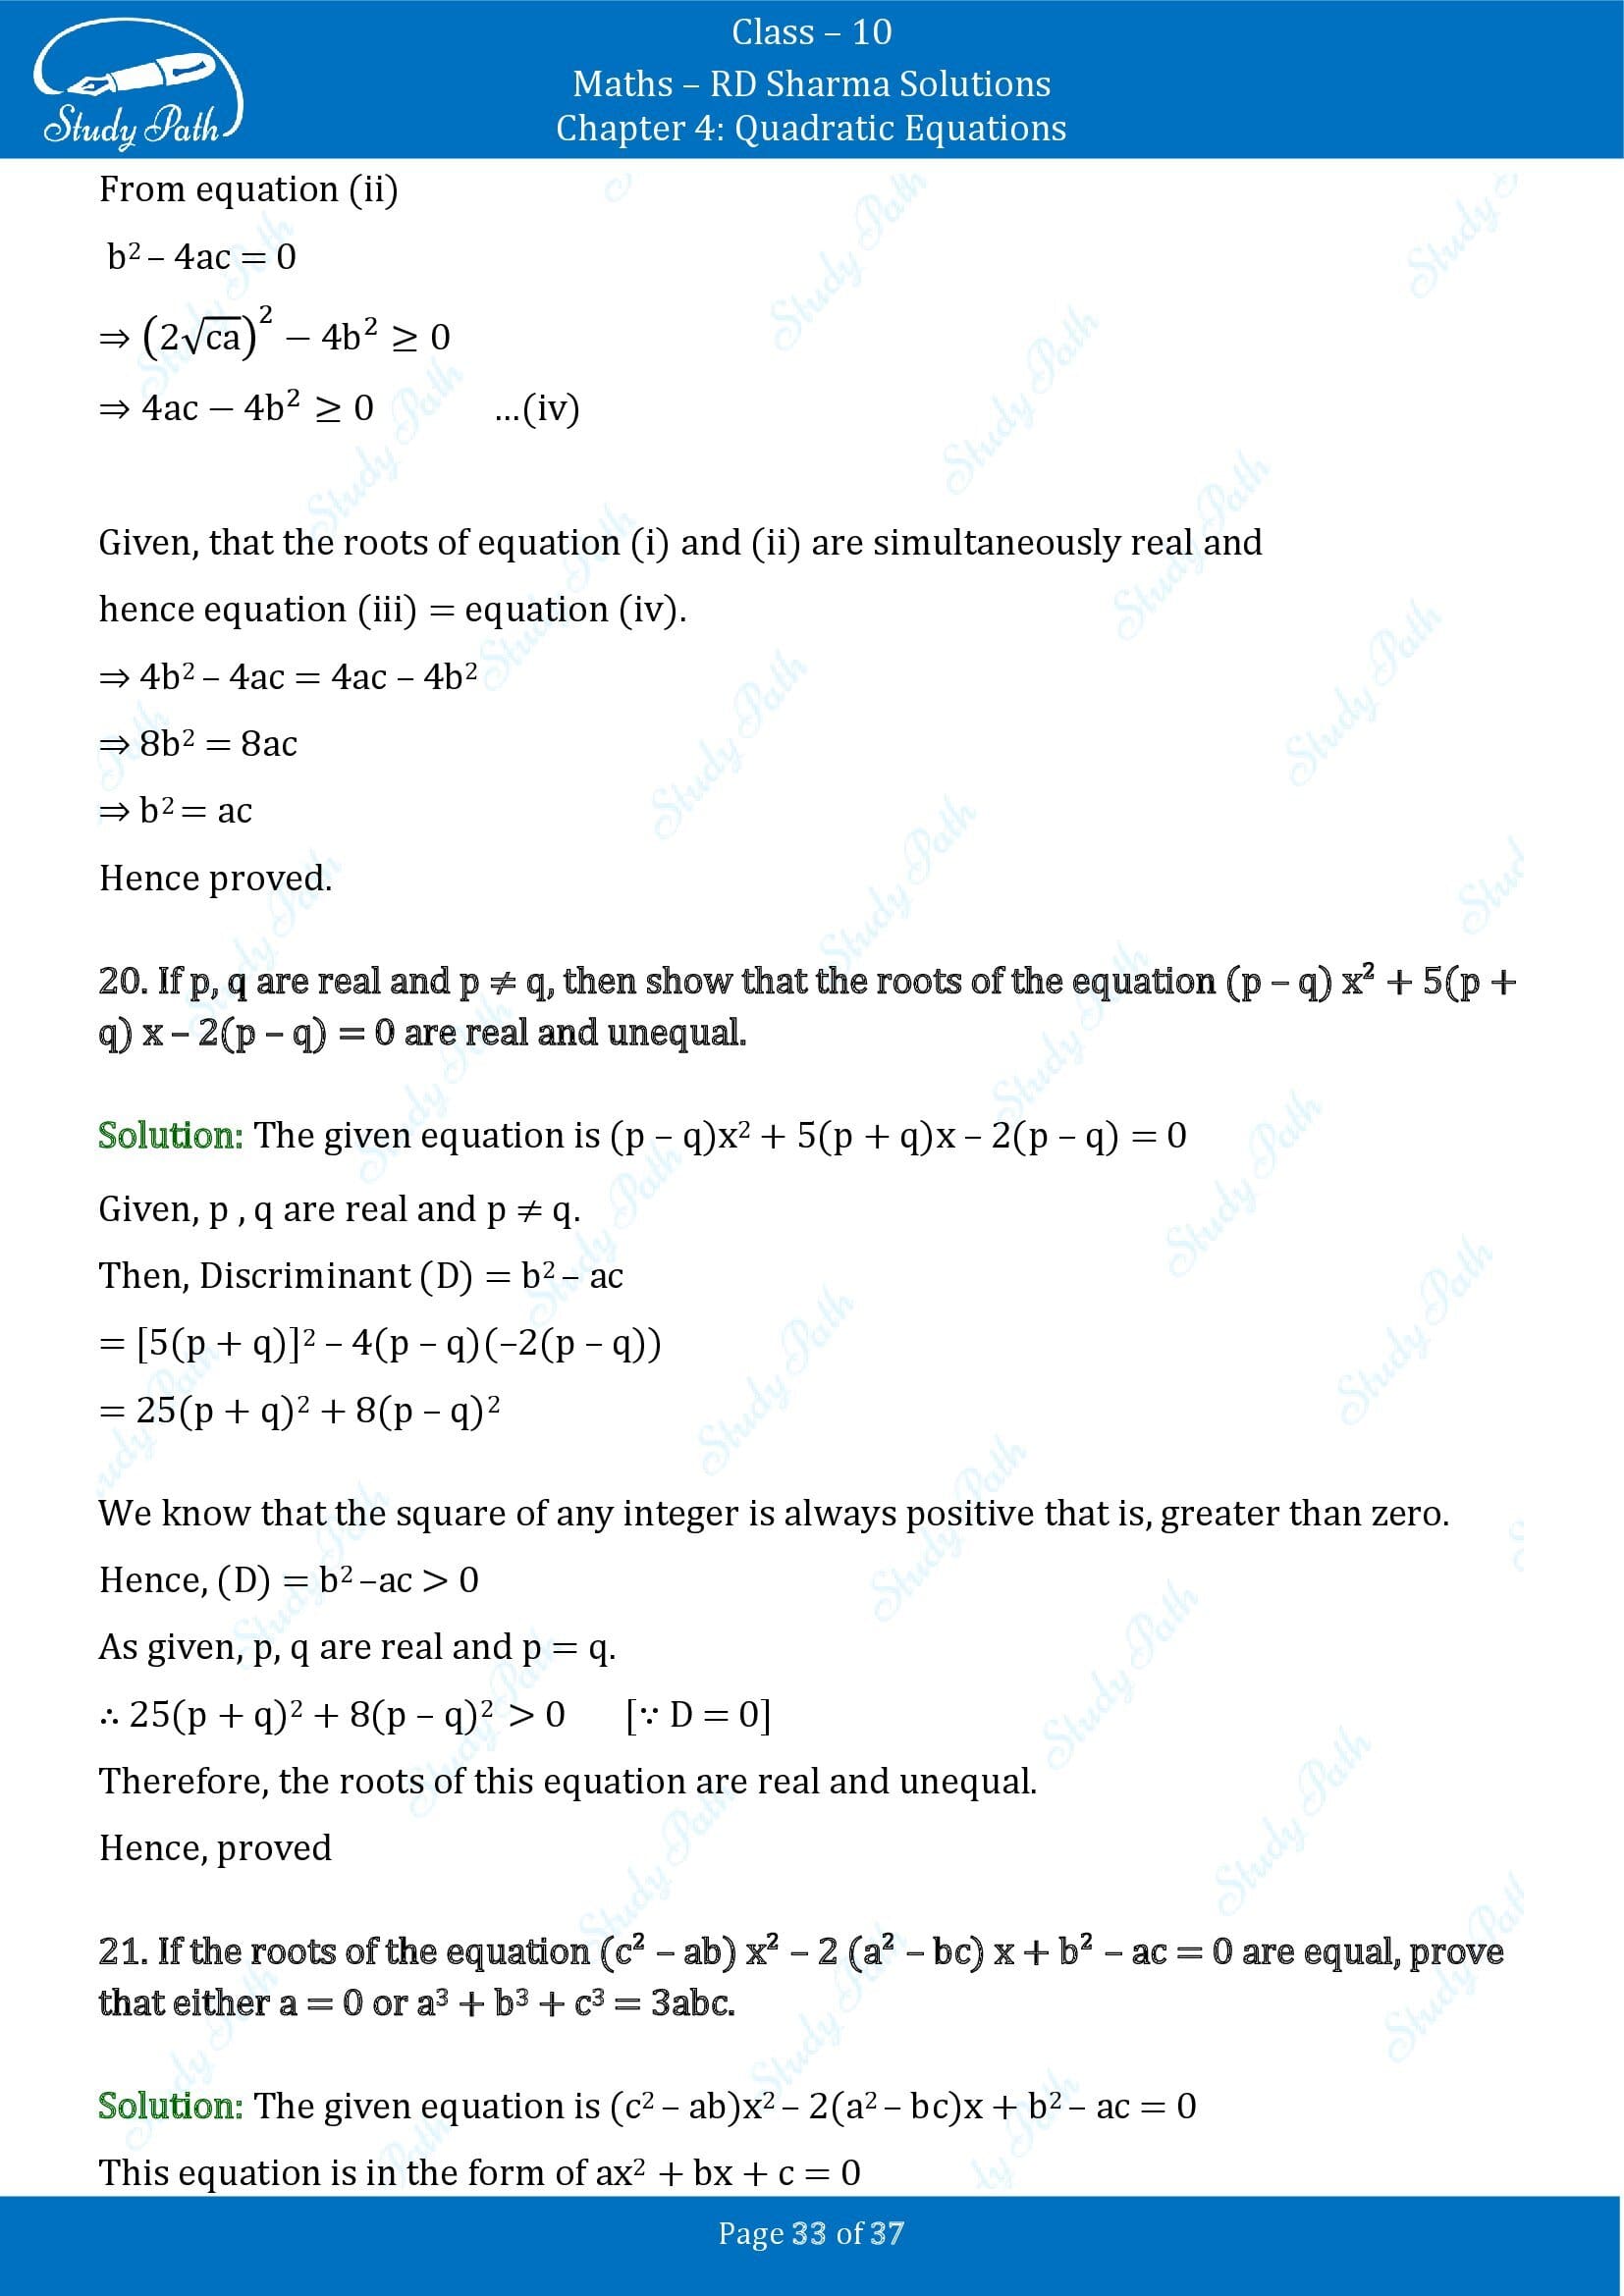 RD Sharma Solutions Class 10 Chapter 4 Quadratic Equations Exercise 4.6 00033